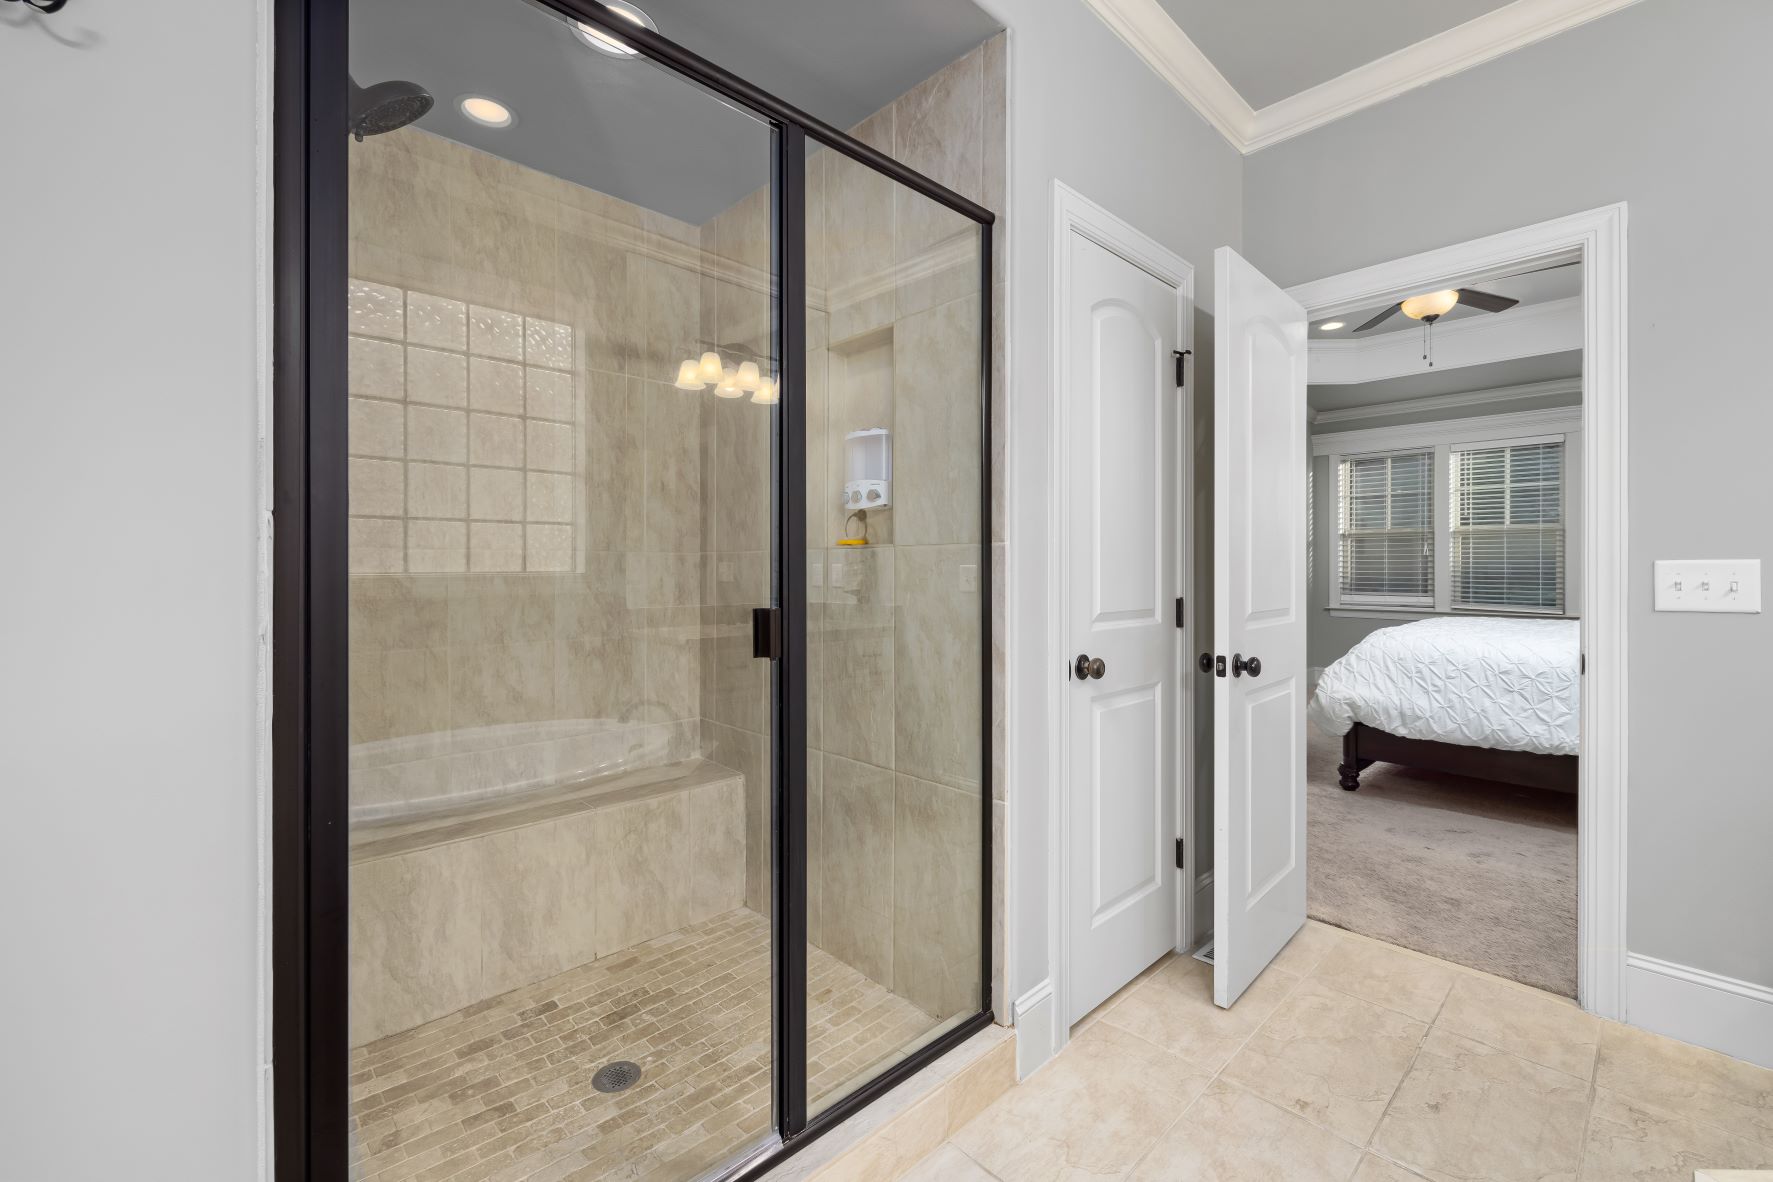 Traditional Shower Door Designs: Engaging and Stylish Options for the Modern Bathroom